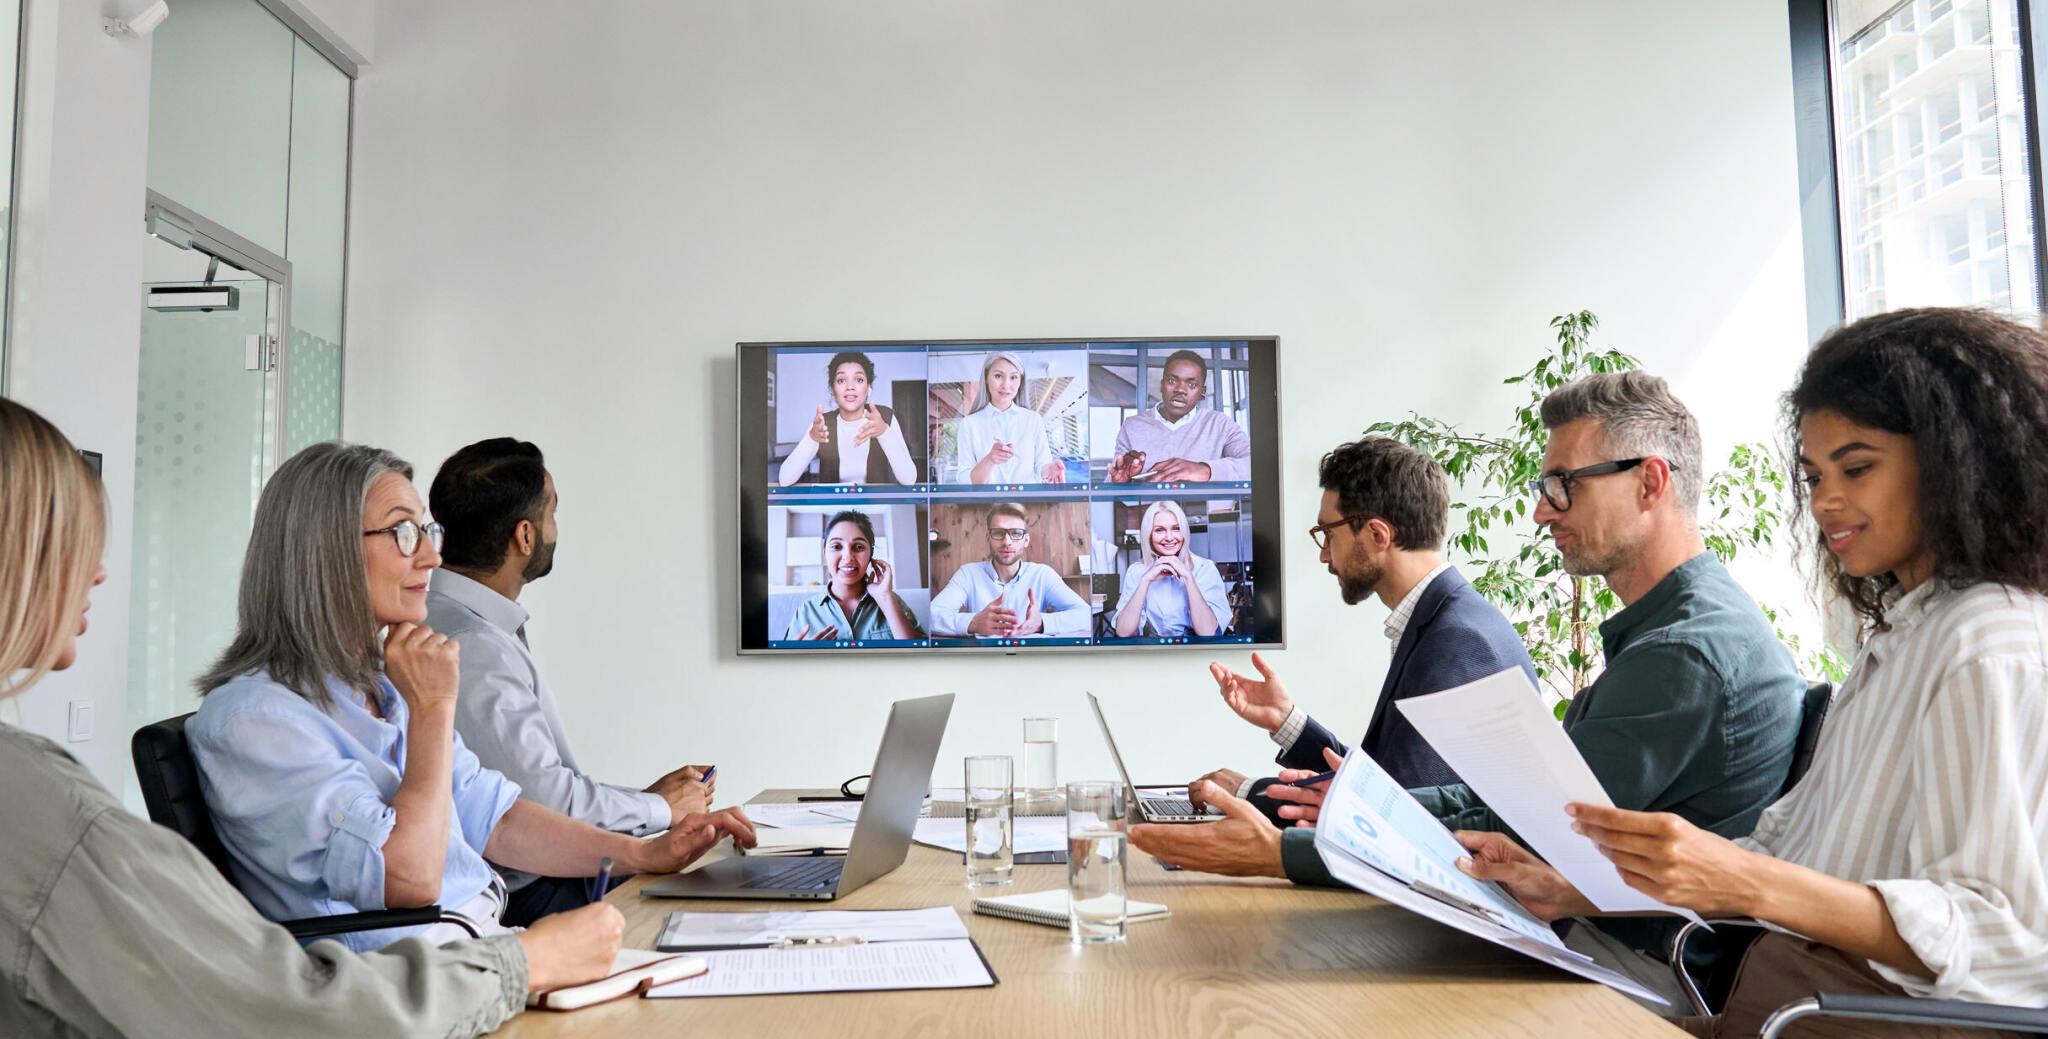 Some people are sitting in the office looking at the big display while discussing with other colleagues in online meetings